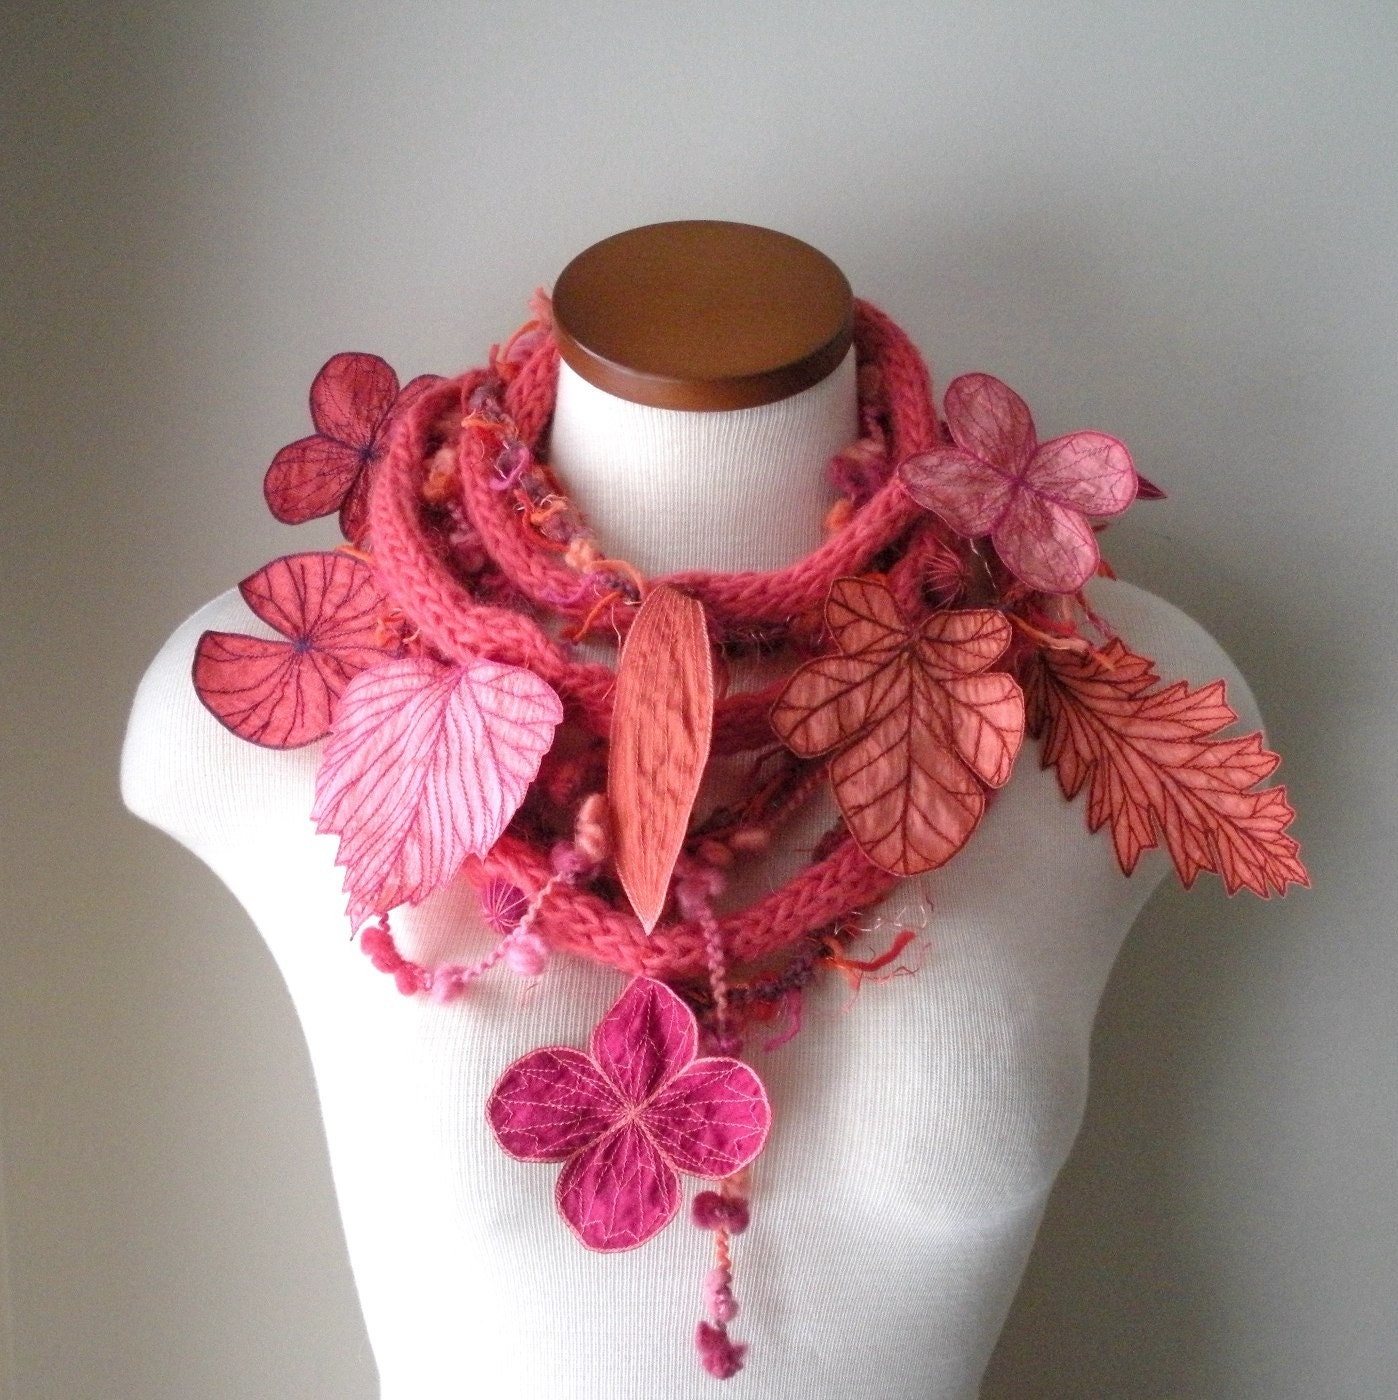 Long and Leafy Scarf with Embroidered Leaves- Bright Salmon with Orange, Thulian Pink, and Red-Violet Berries